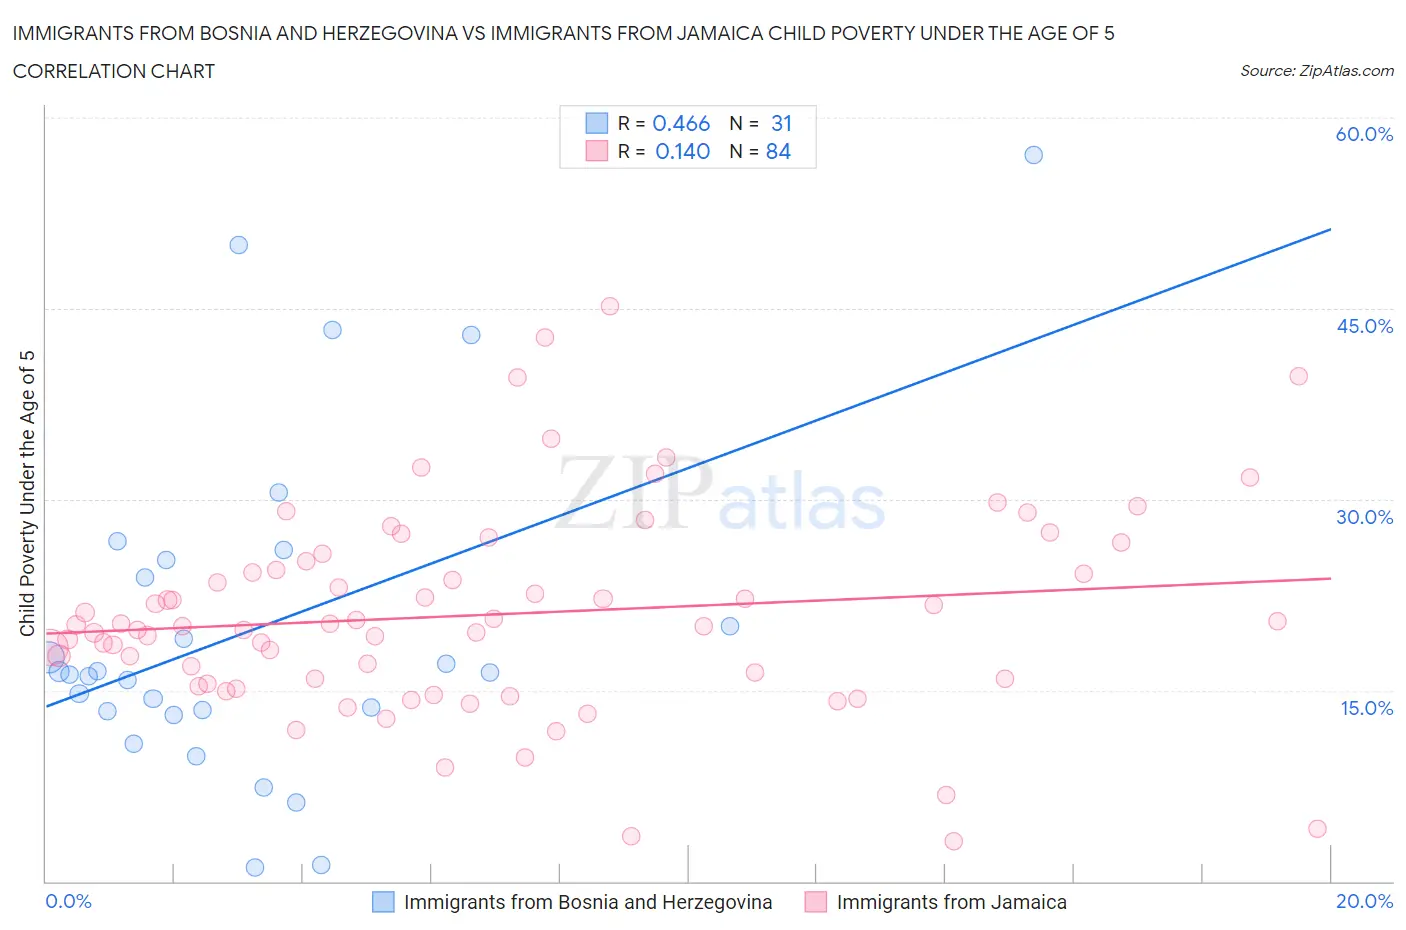 Immigrants from Bosnia and Herzegovina vs Immigrants from Jamaica Child Poverty Under the Age of 5